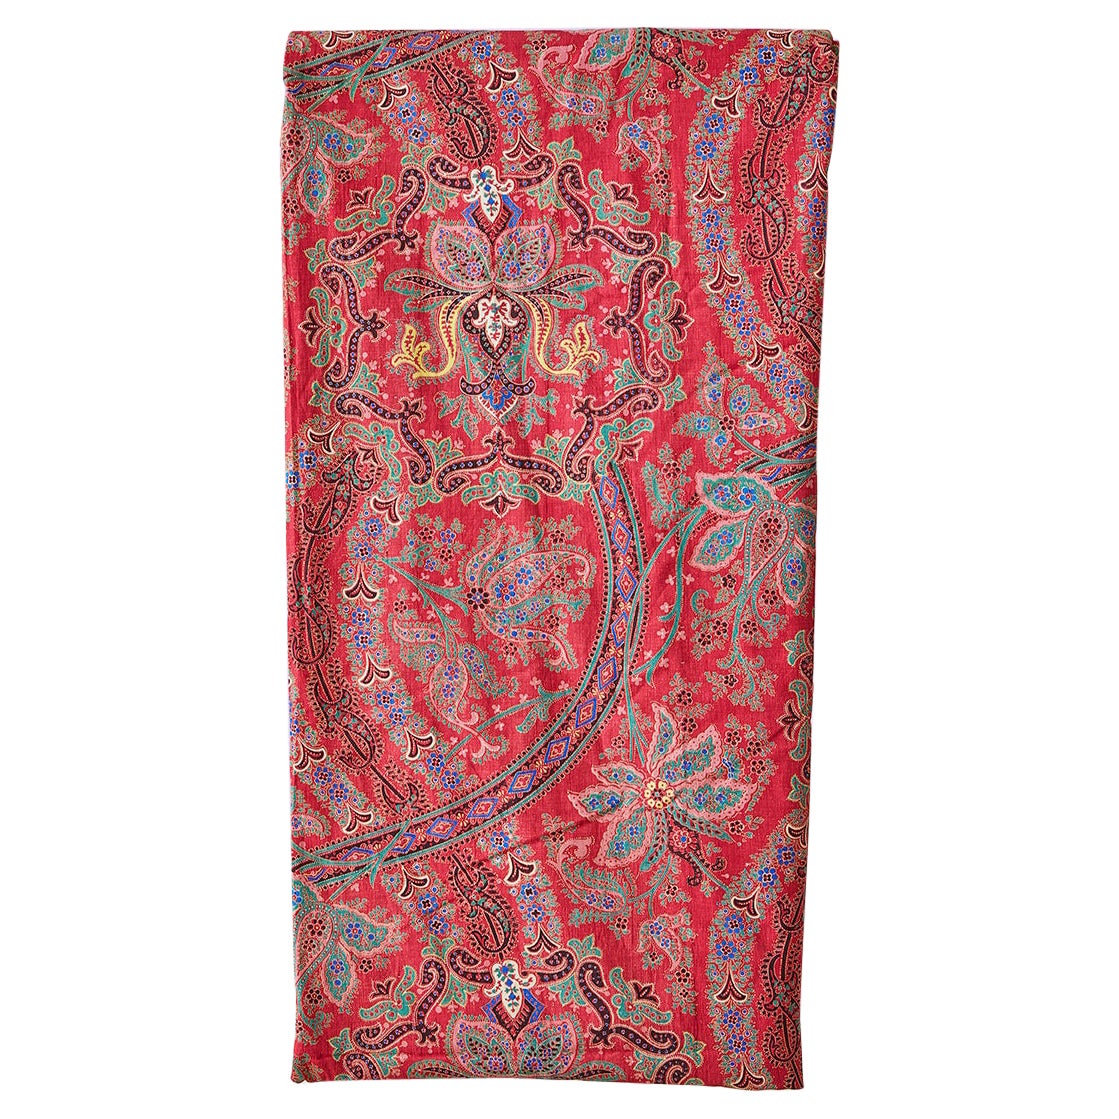 Large Antique Paisley Curtain Textile in Red with Pattern, France, 19th Century